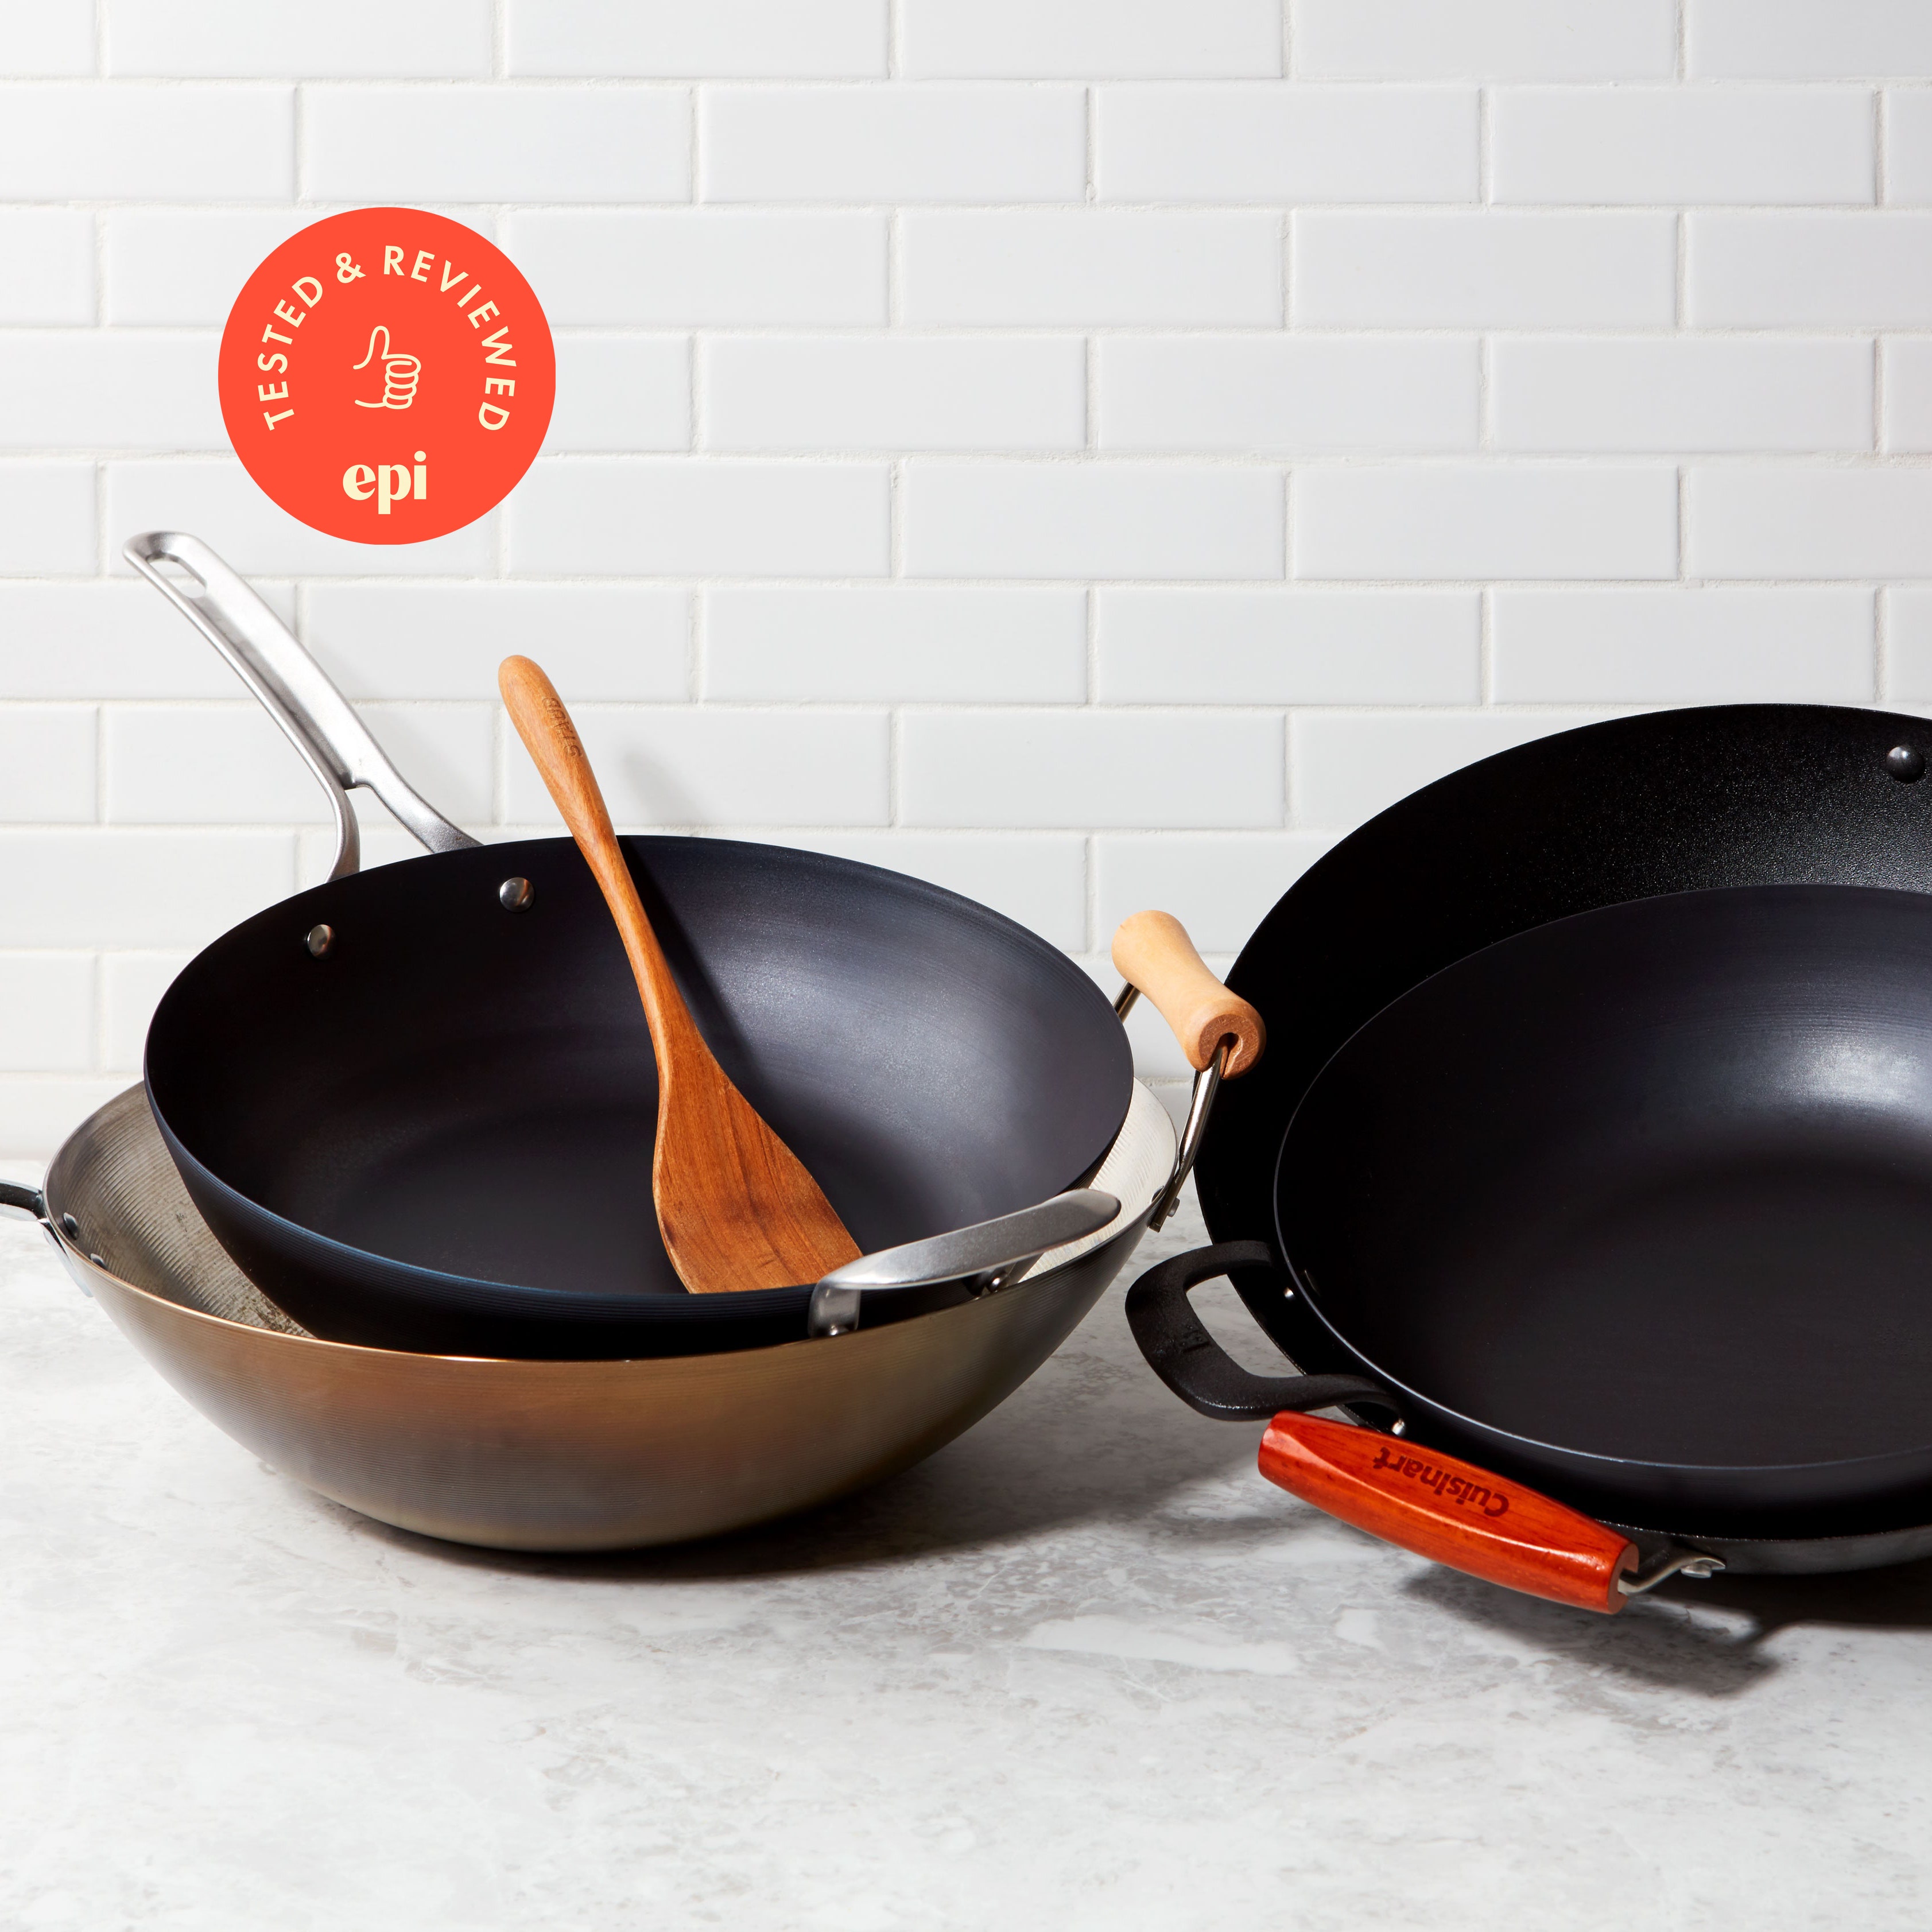 The Best Wok for Stir-Frying at Home, Tested and Reviewed